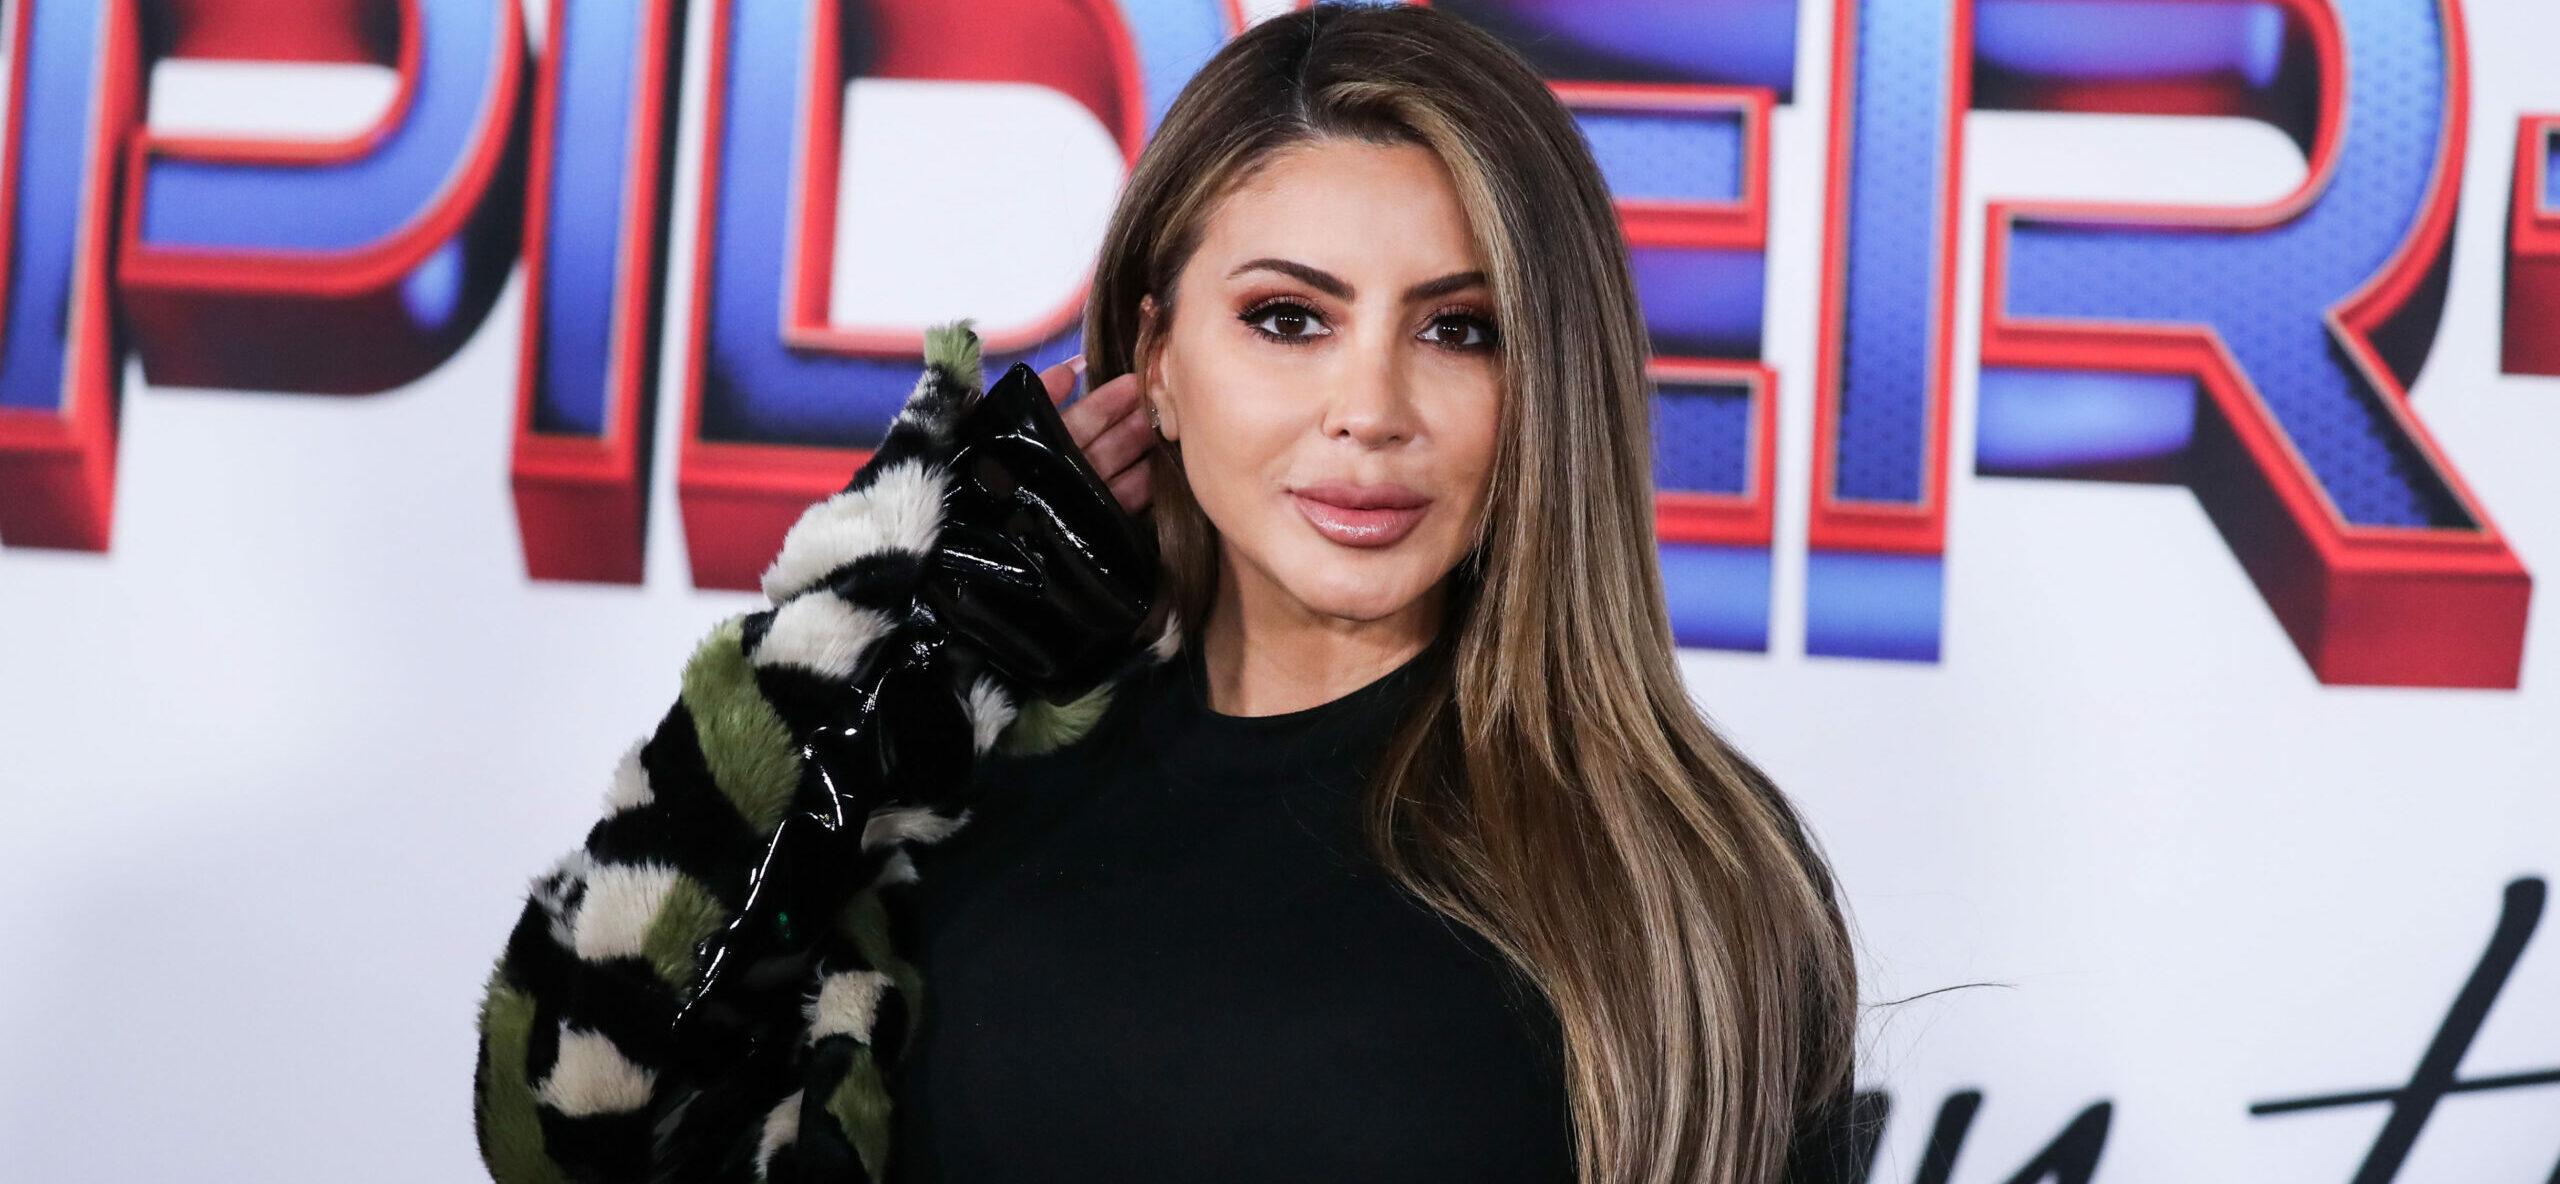 Larsa Pippen Reveals Why She’s Taking a Break From OnlyFans